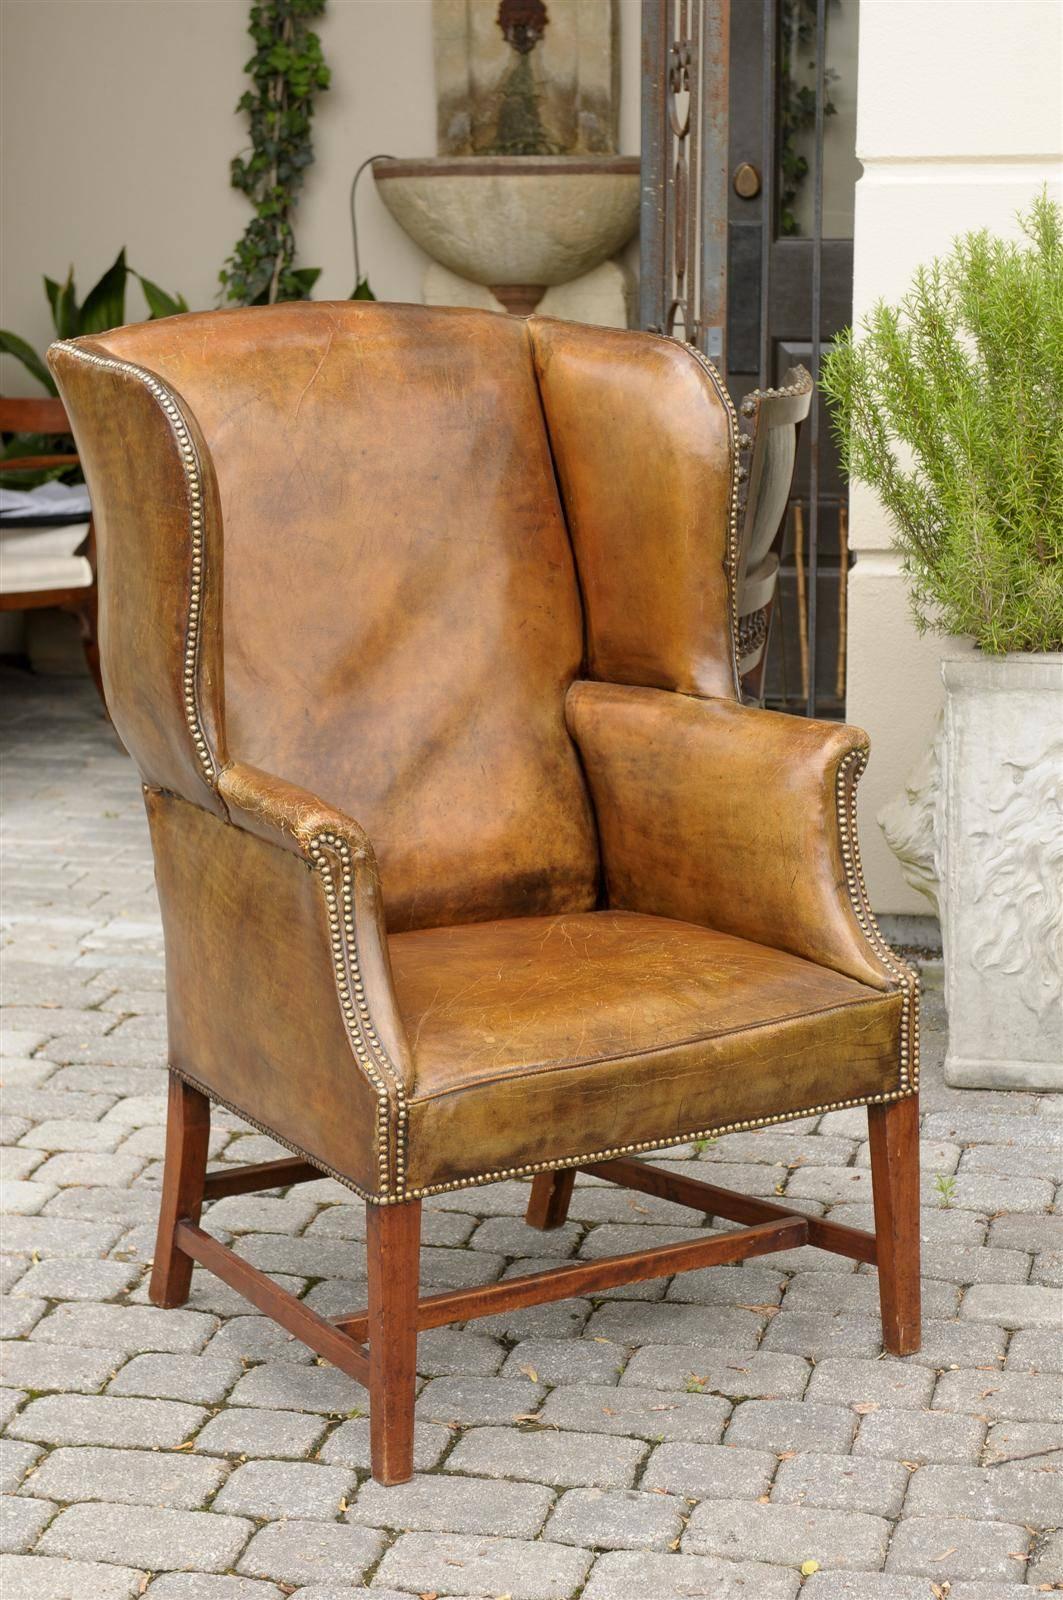 19 th c.English leather wing chair with brass tacks and beautiful profile.